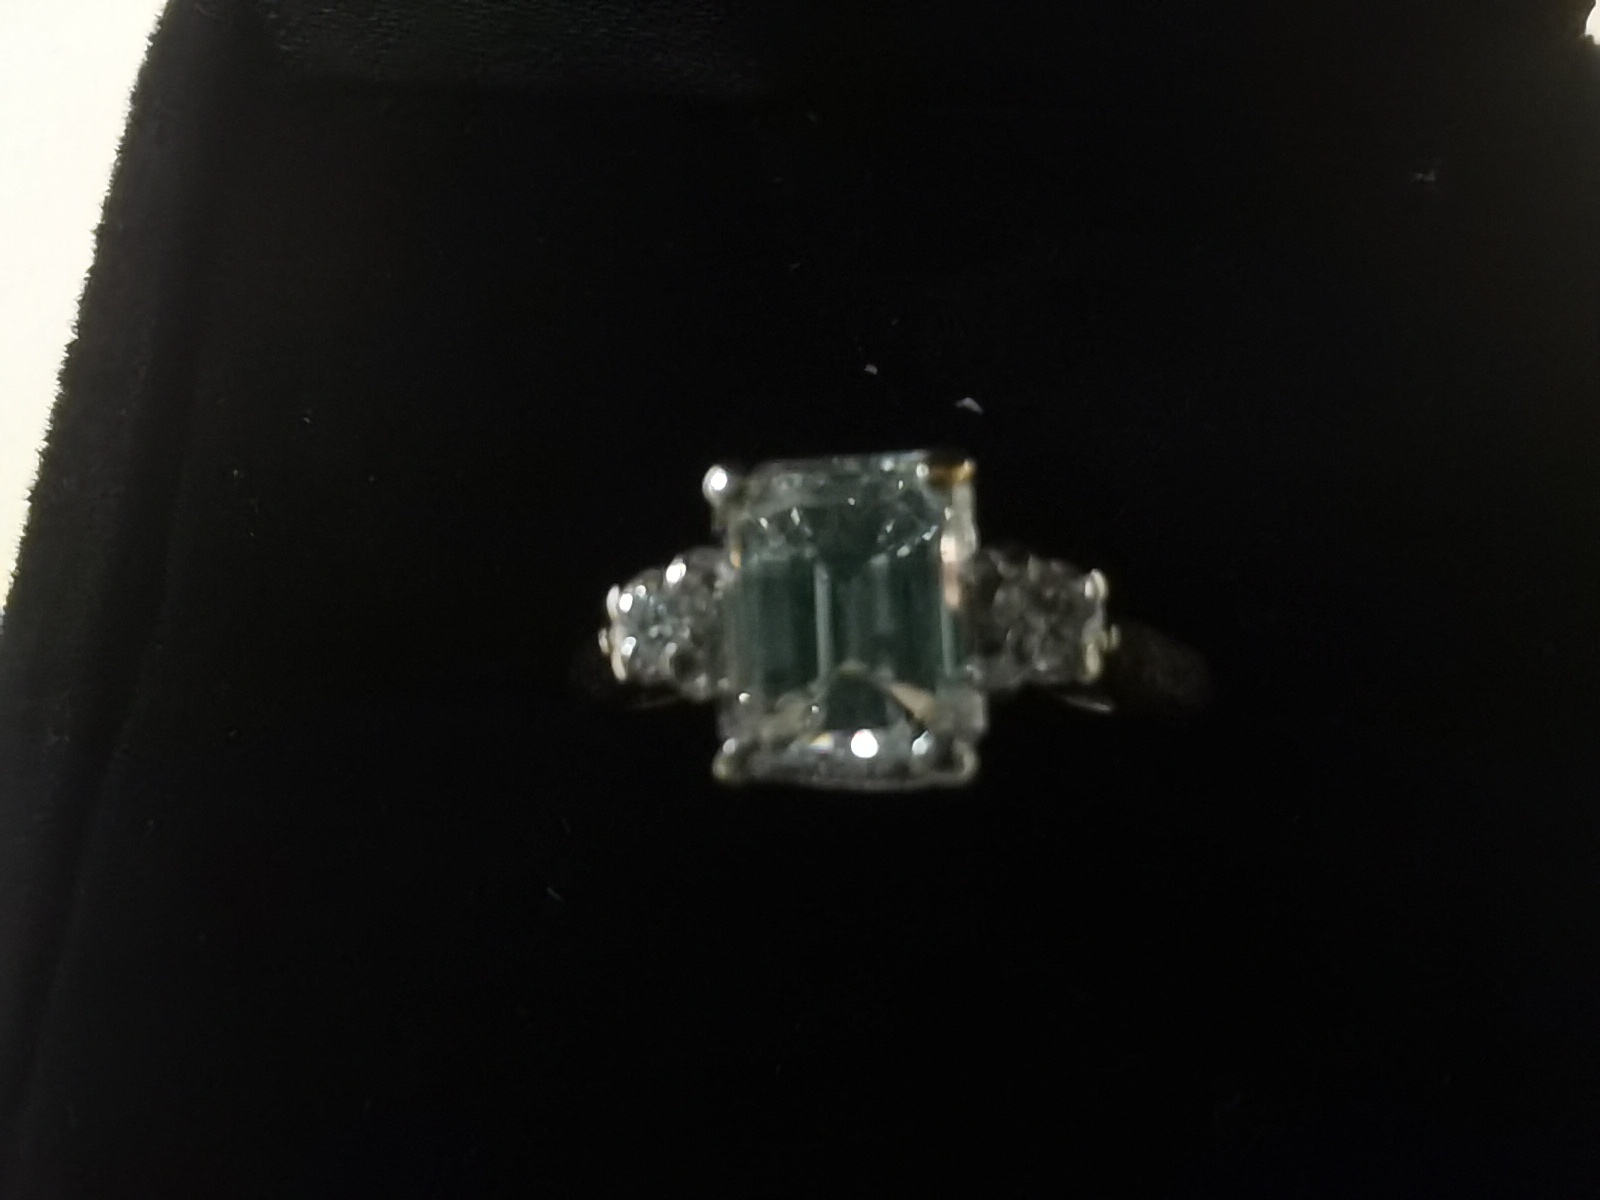 Diamond Ring - Emerald Cut 1.03 with 10 points either side in 18carat yellow gold size J - Image 7 of 9